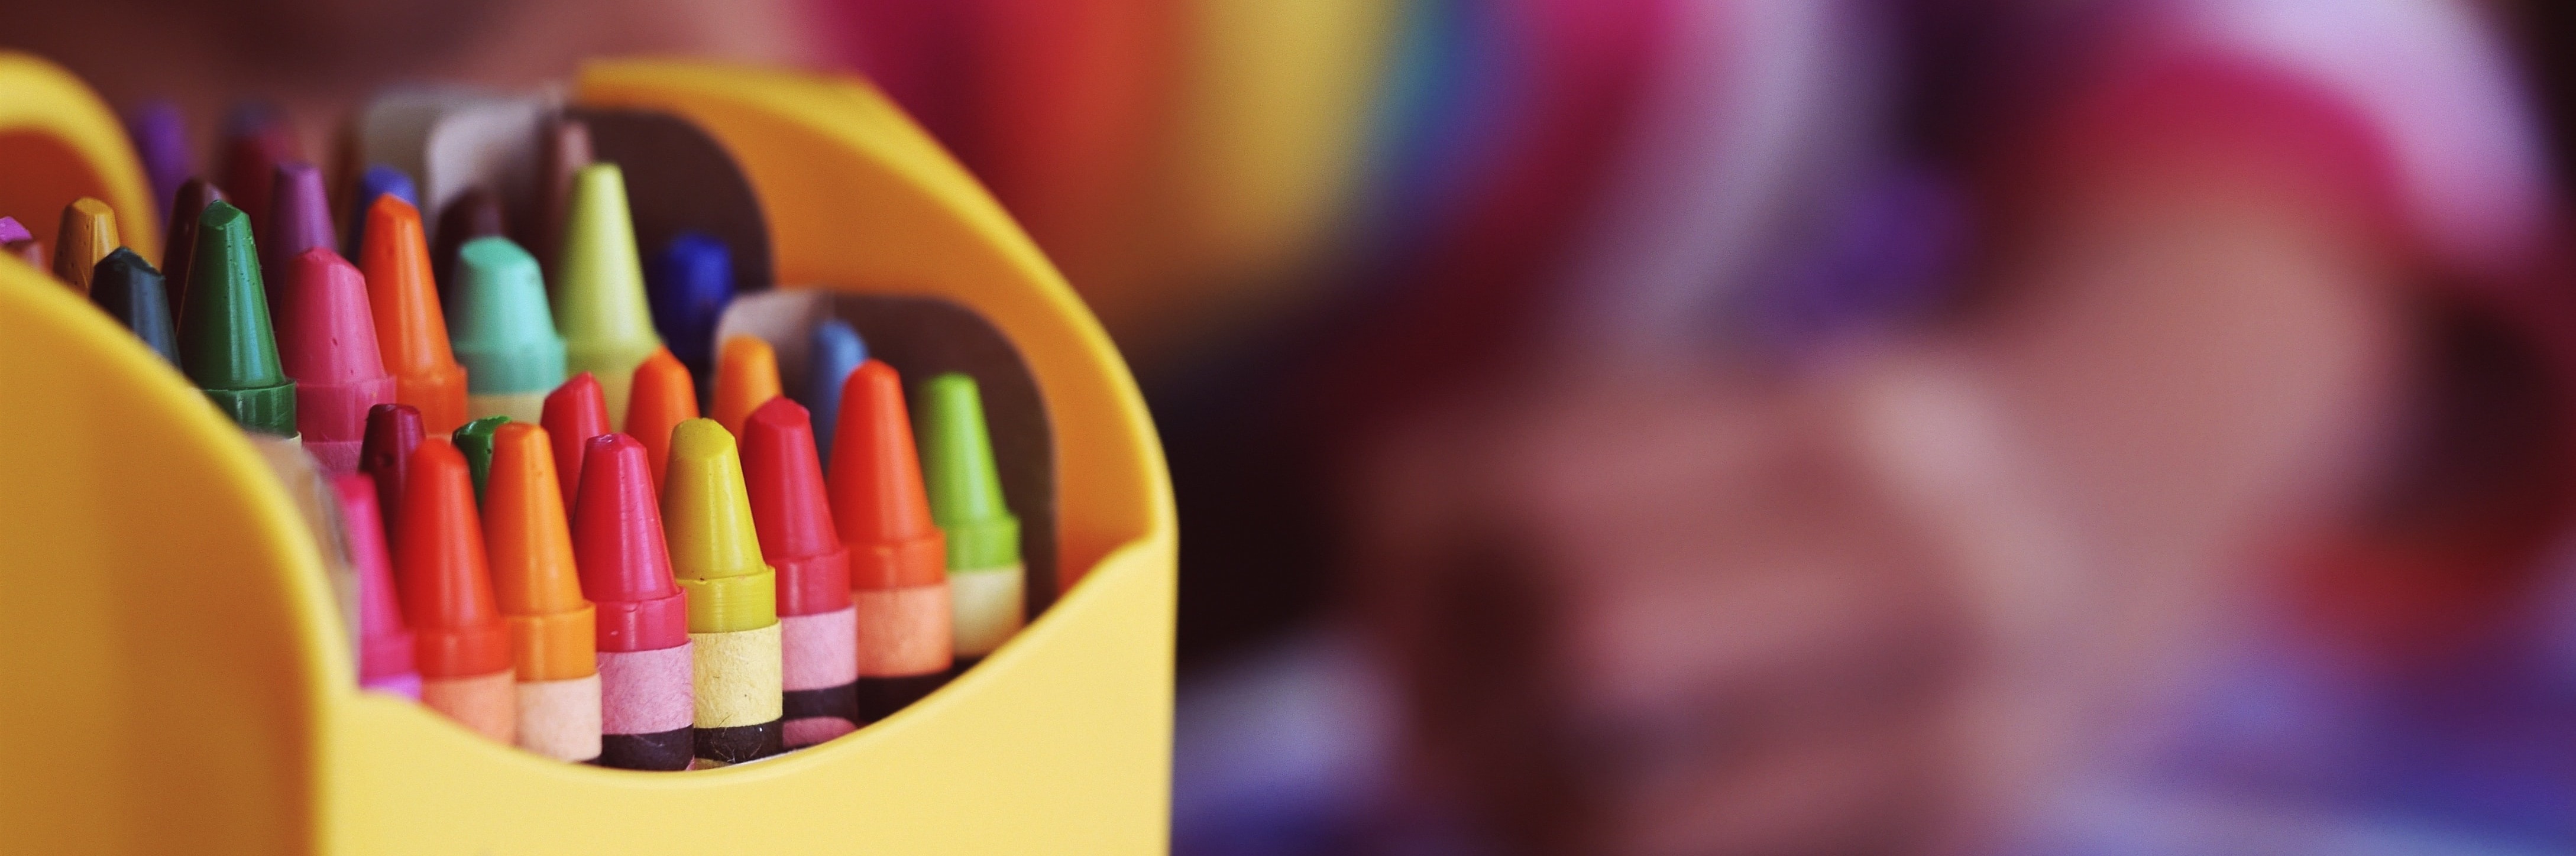 Crayons_discover at home